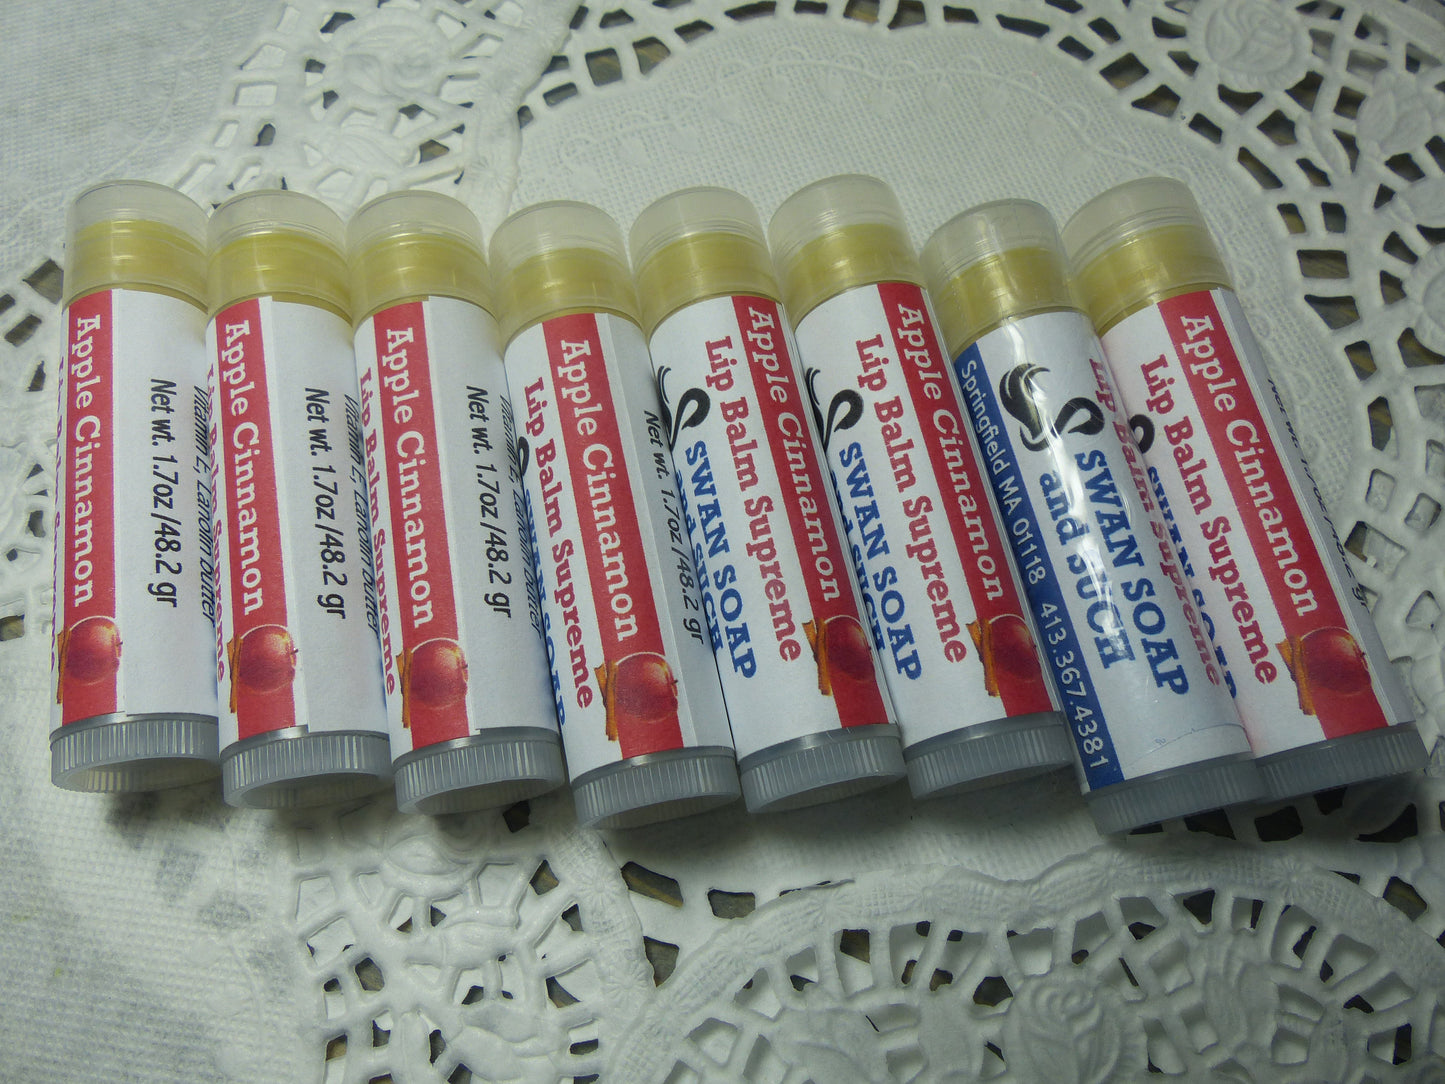 Lip Balm  - Lip Balm Supreme - Smooth lips for the dry winters, Coverage for the harsh sun